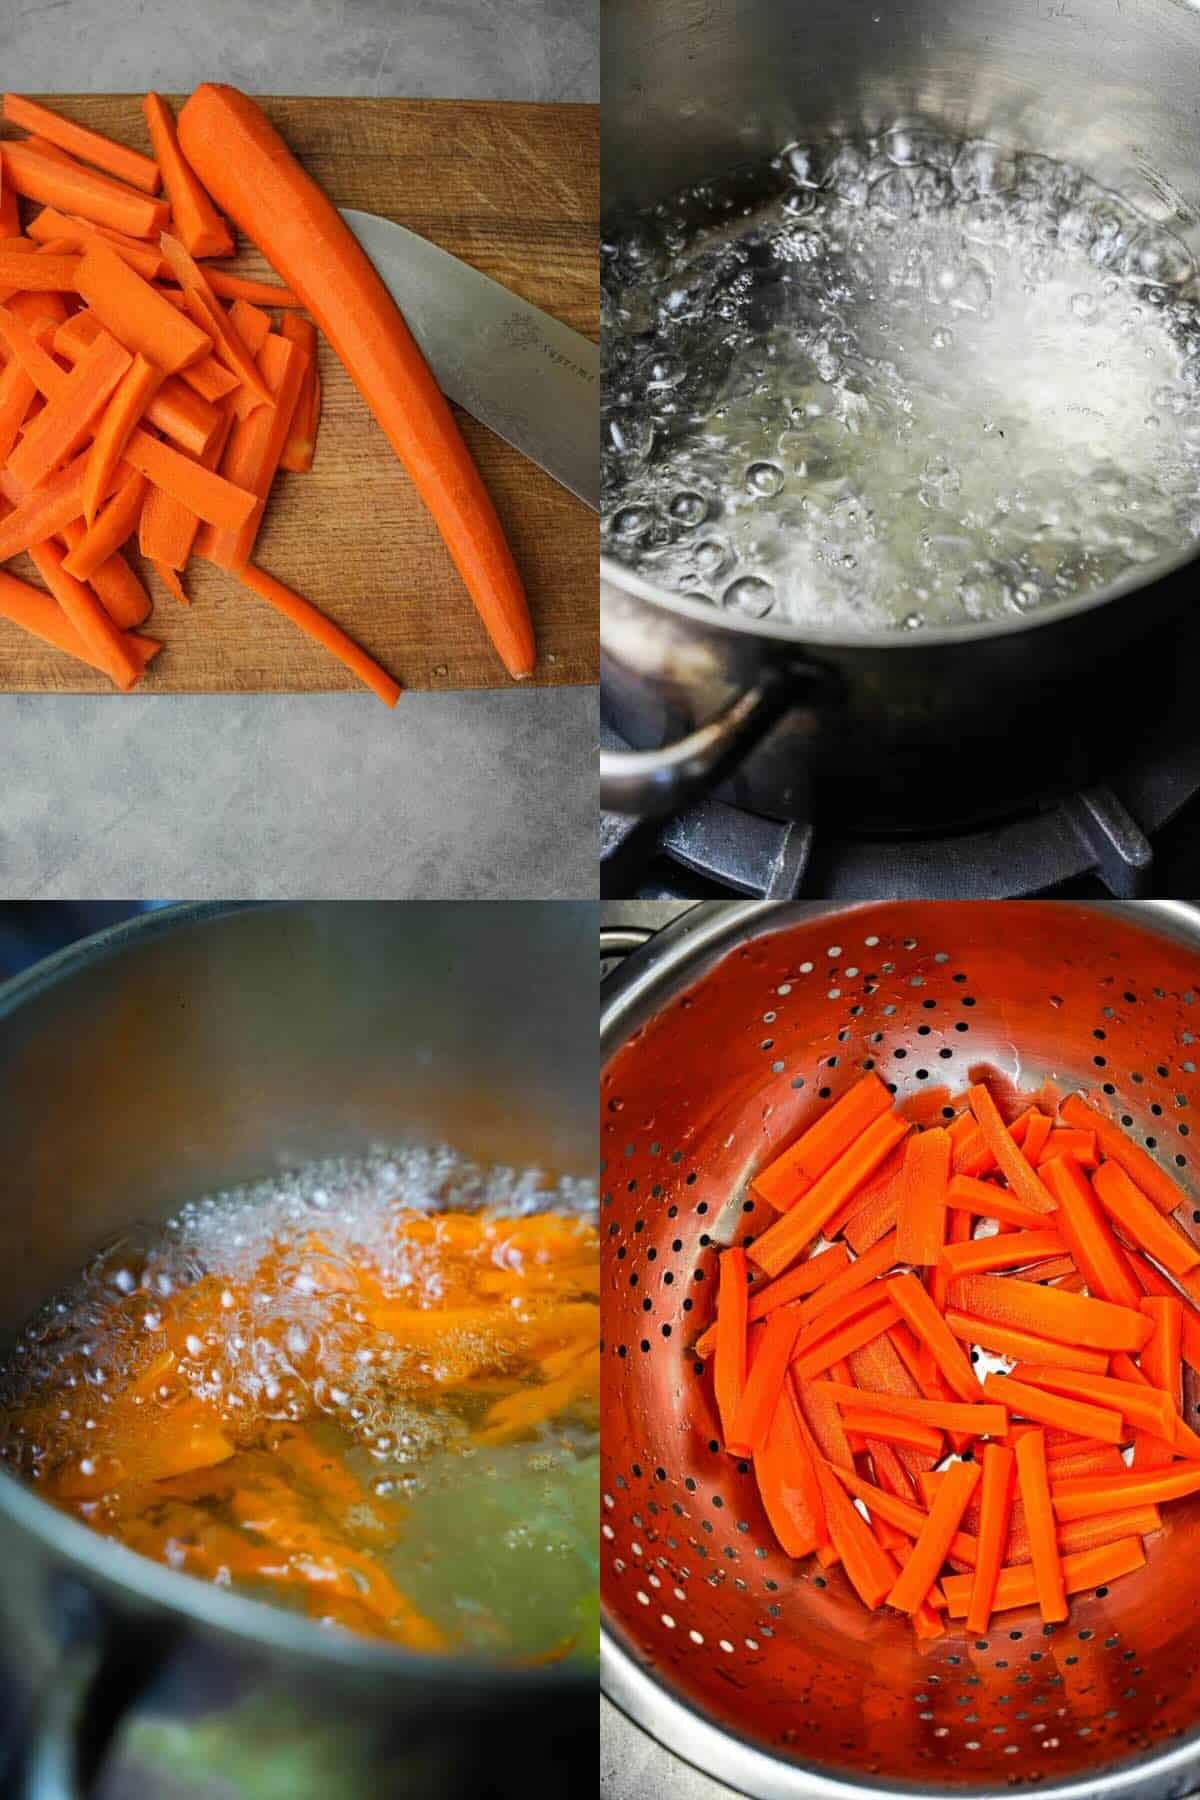 Four pictures of Carrots being cut, cooked and drained to make pickles.